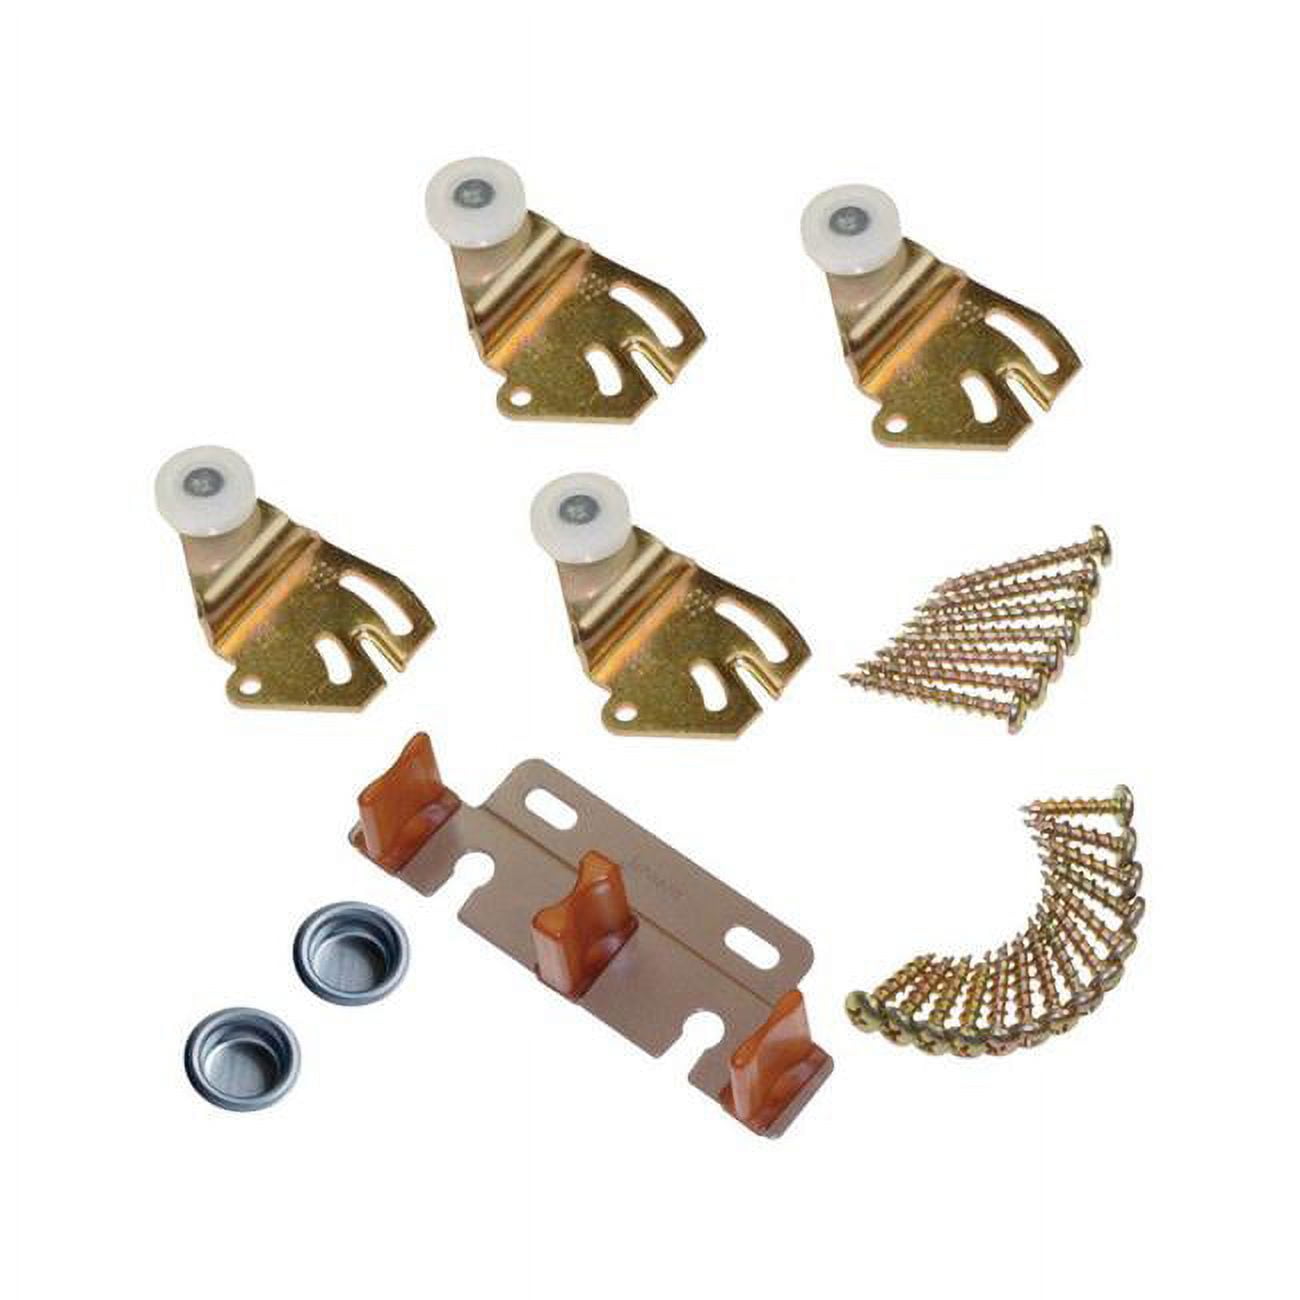 5001299 Brass-plated Brown & White Metal By-pass Part Set